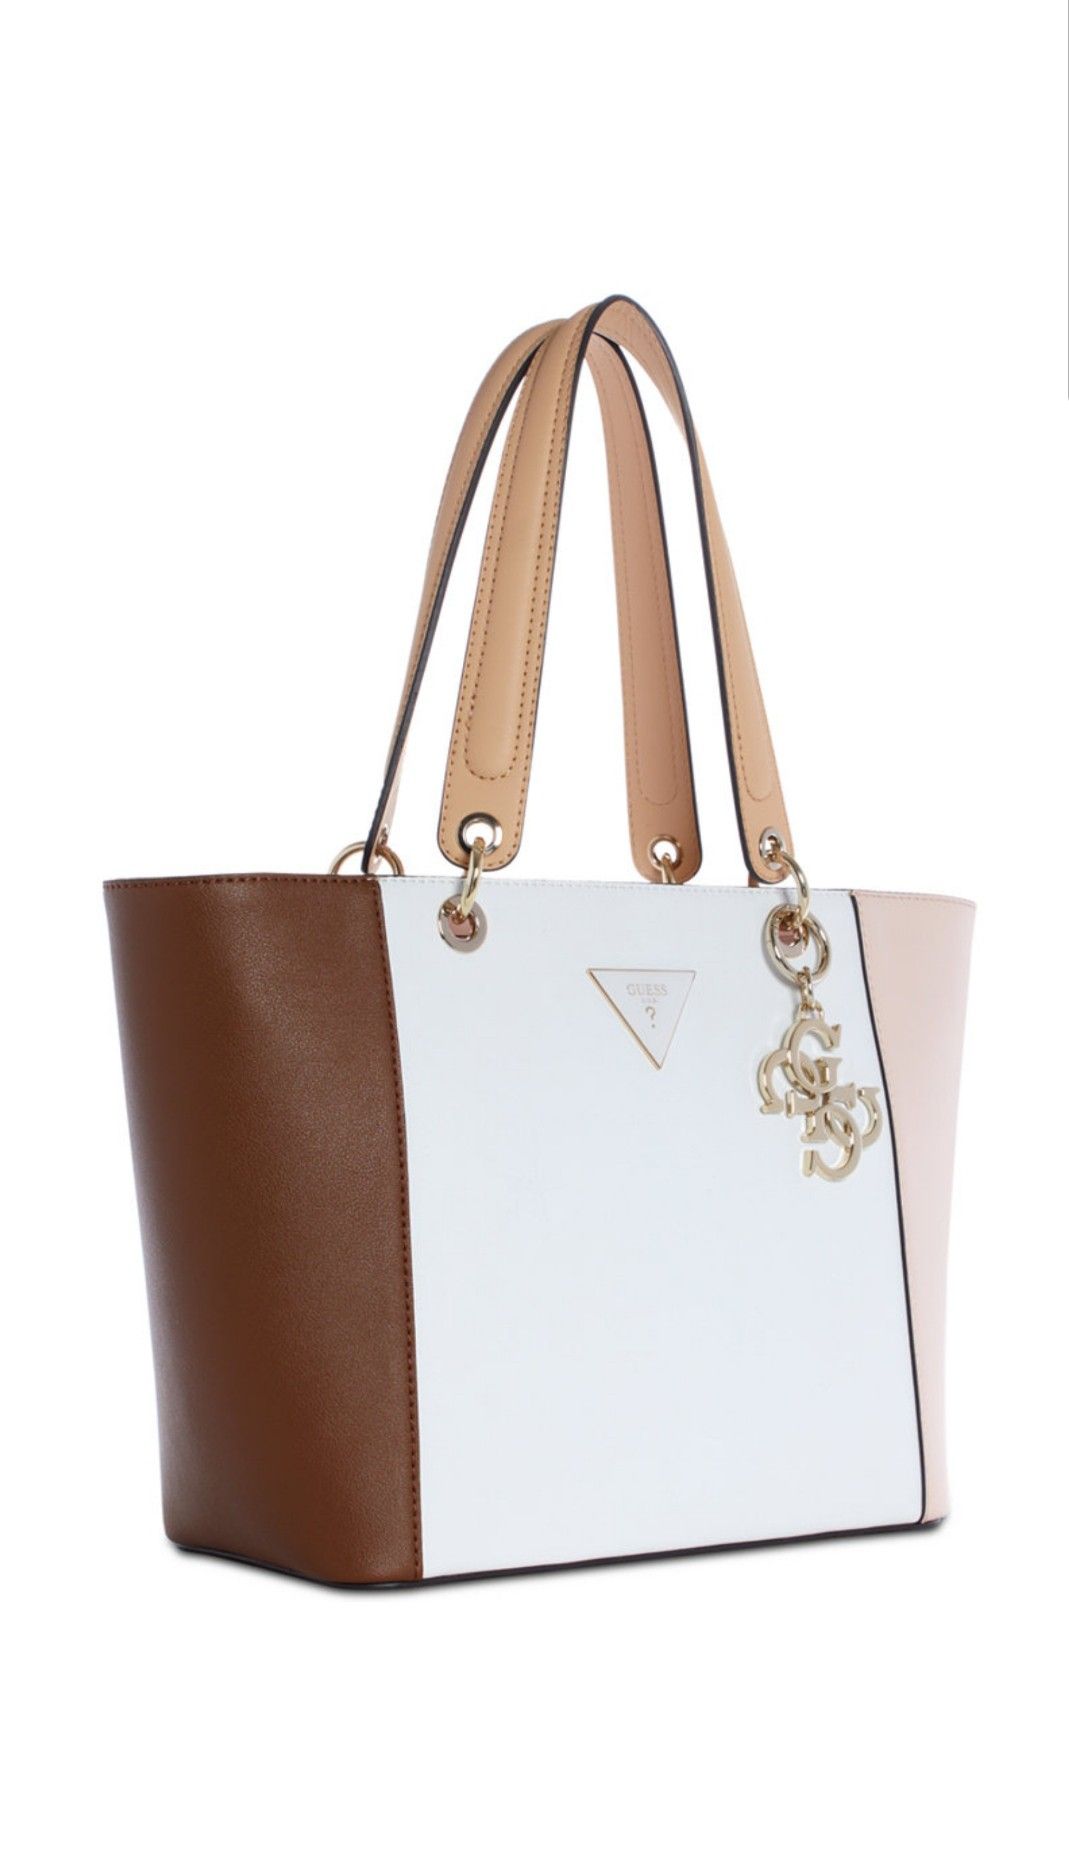 Tote hand bags cameo multi color and floral